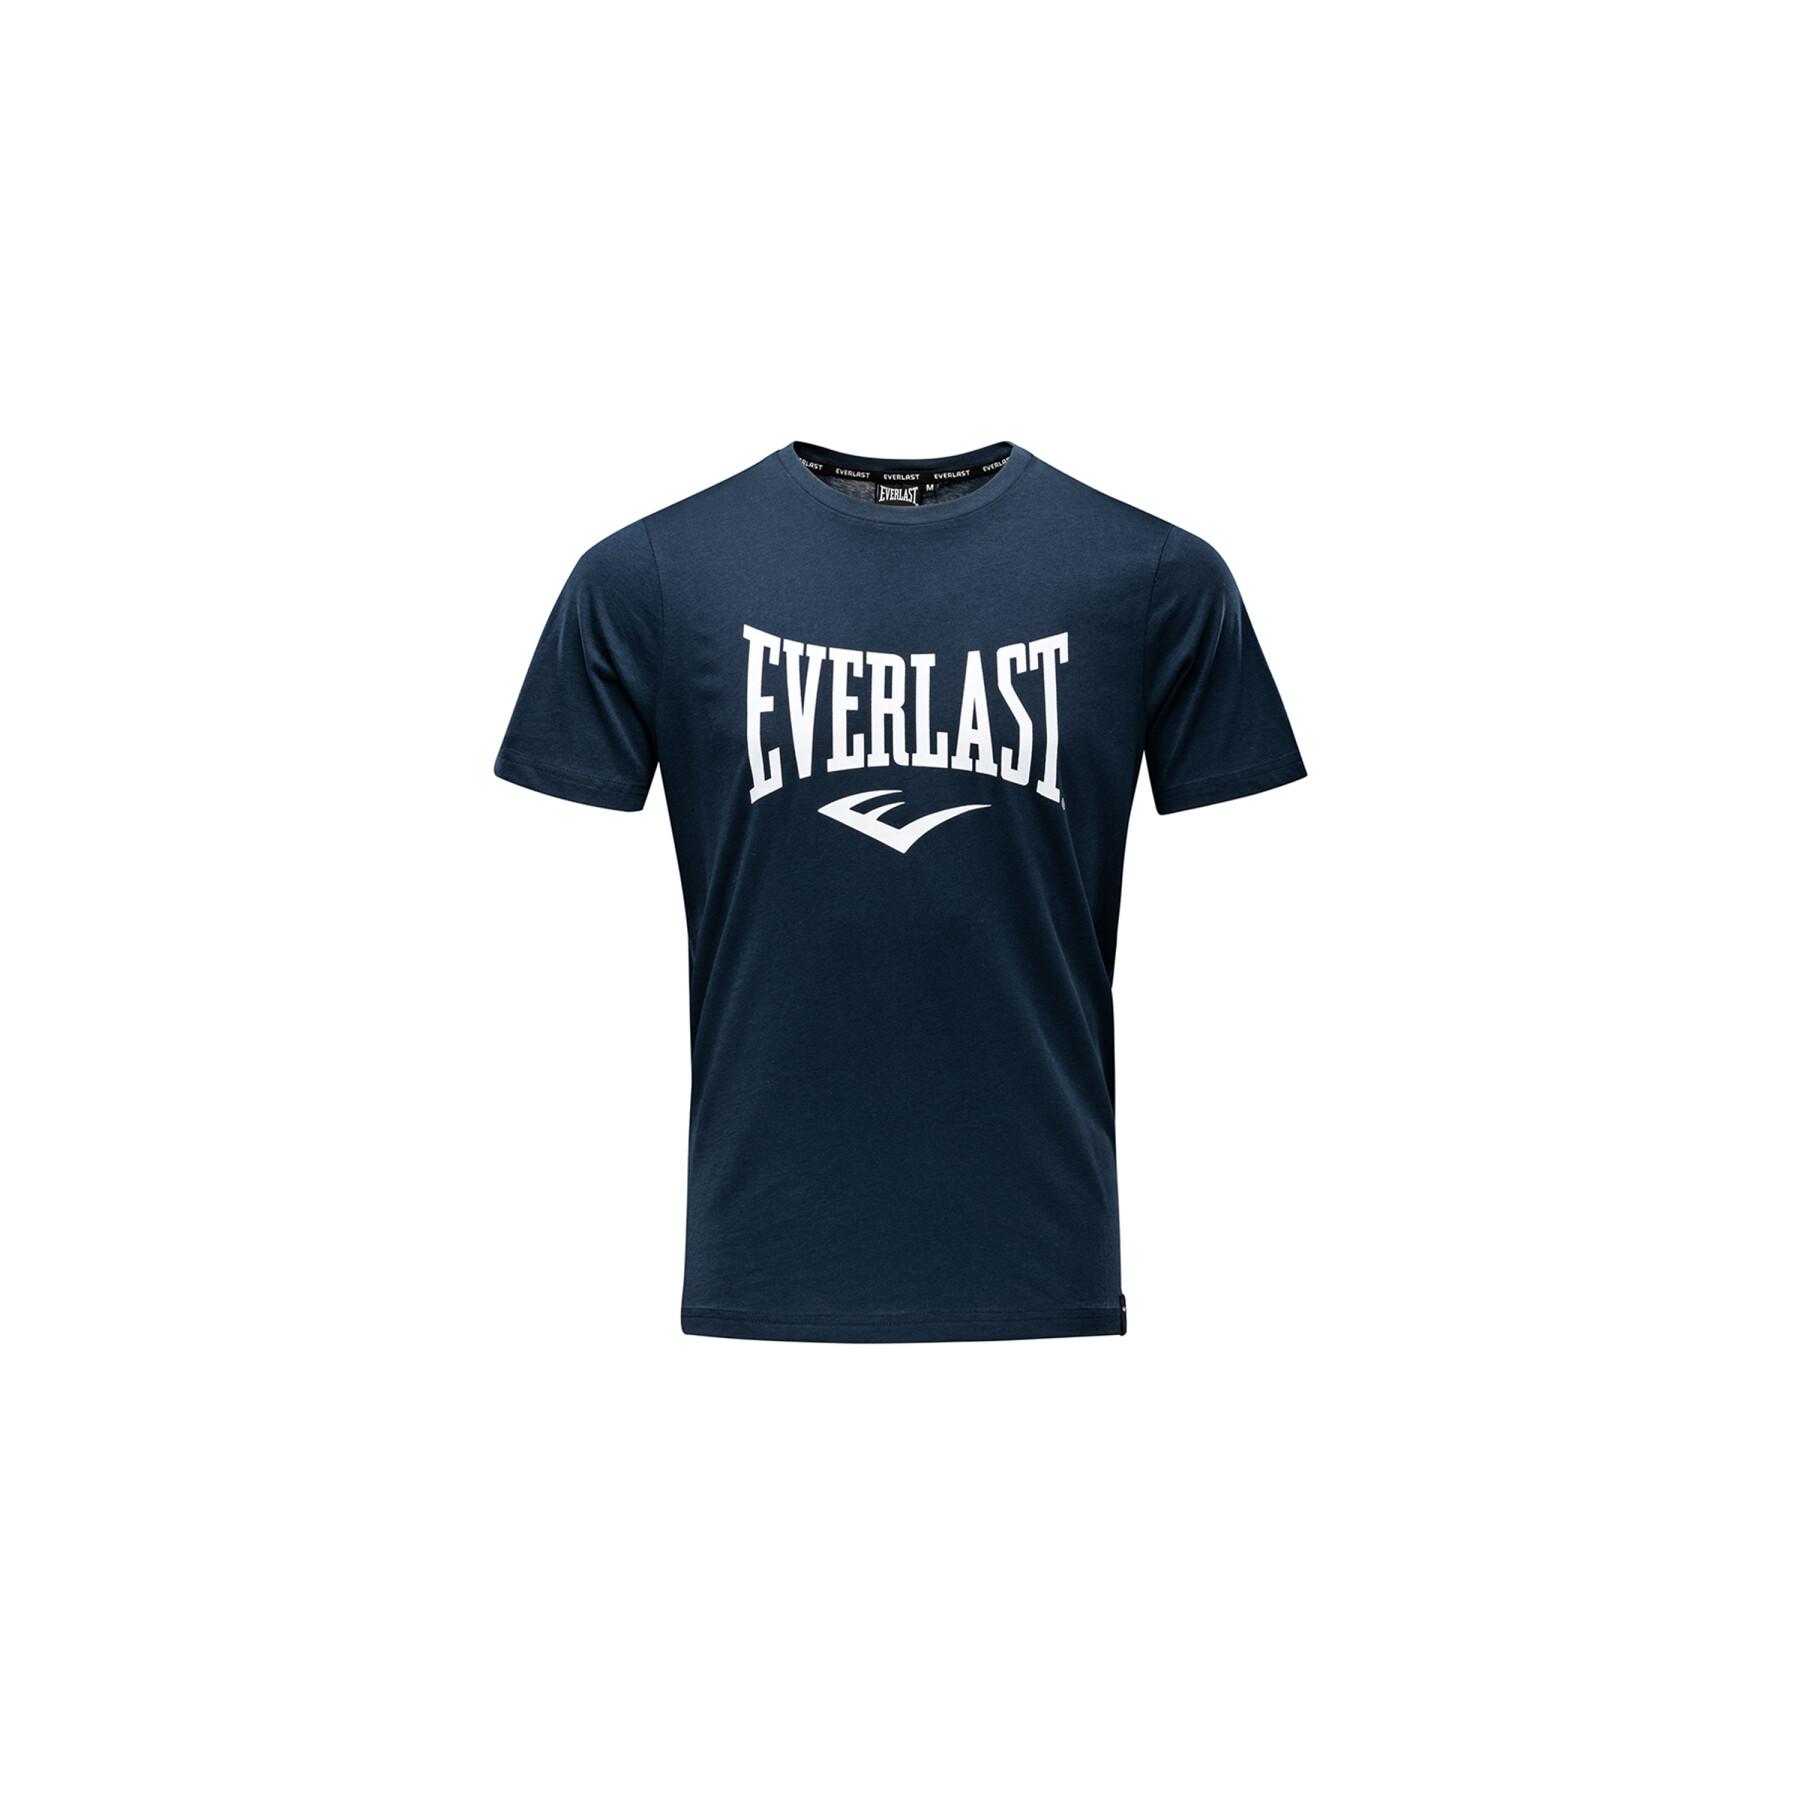 T-shirt manches courtes Everlast russel